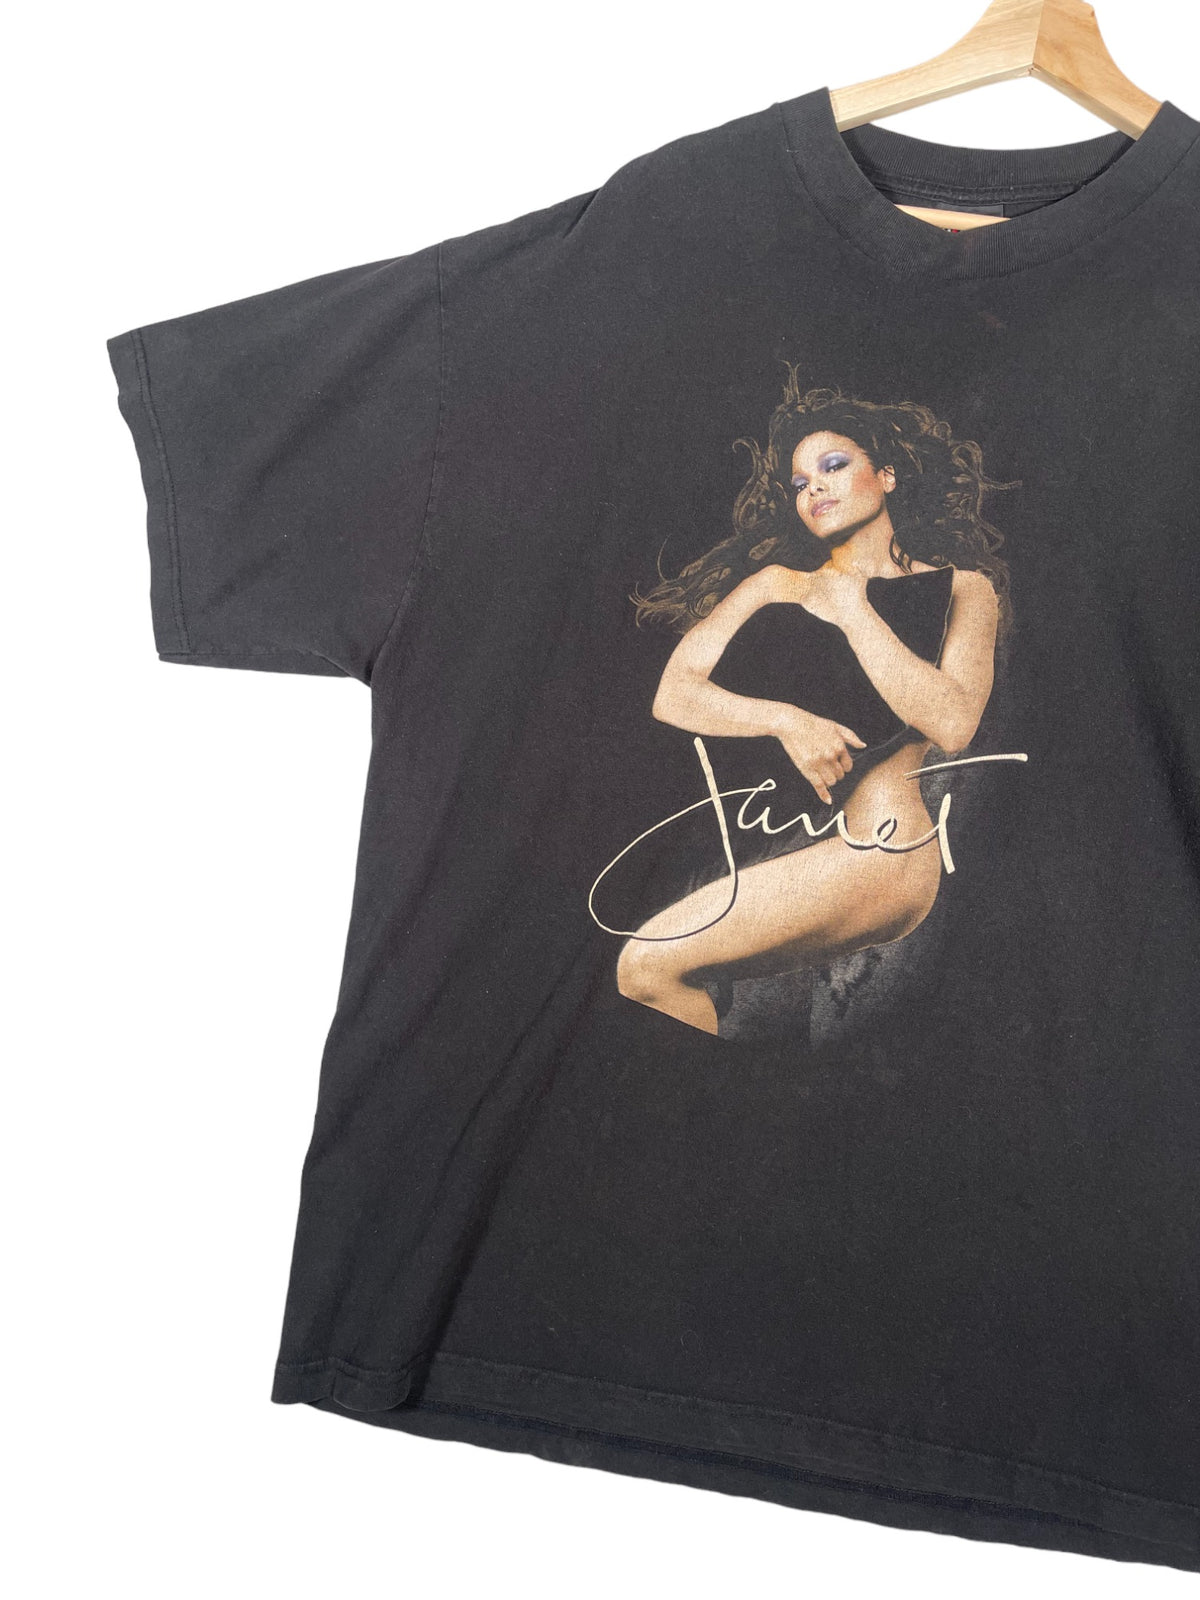 Vintage 2000's Janet Jackson All For You Tour T-Shirt